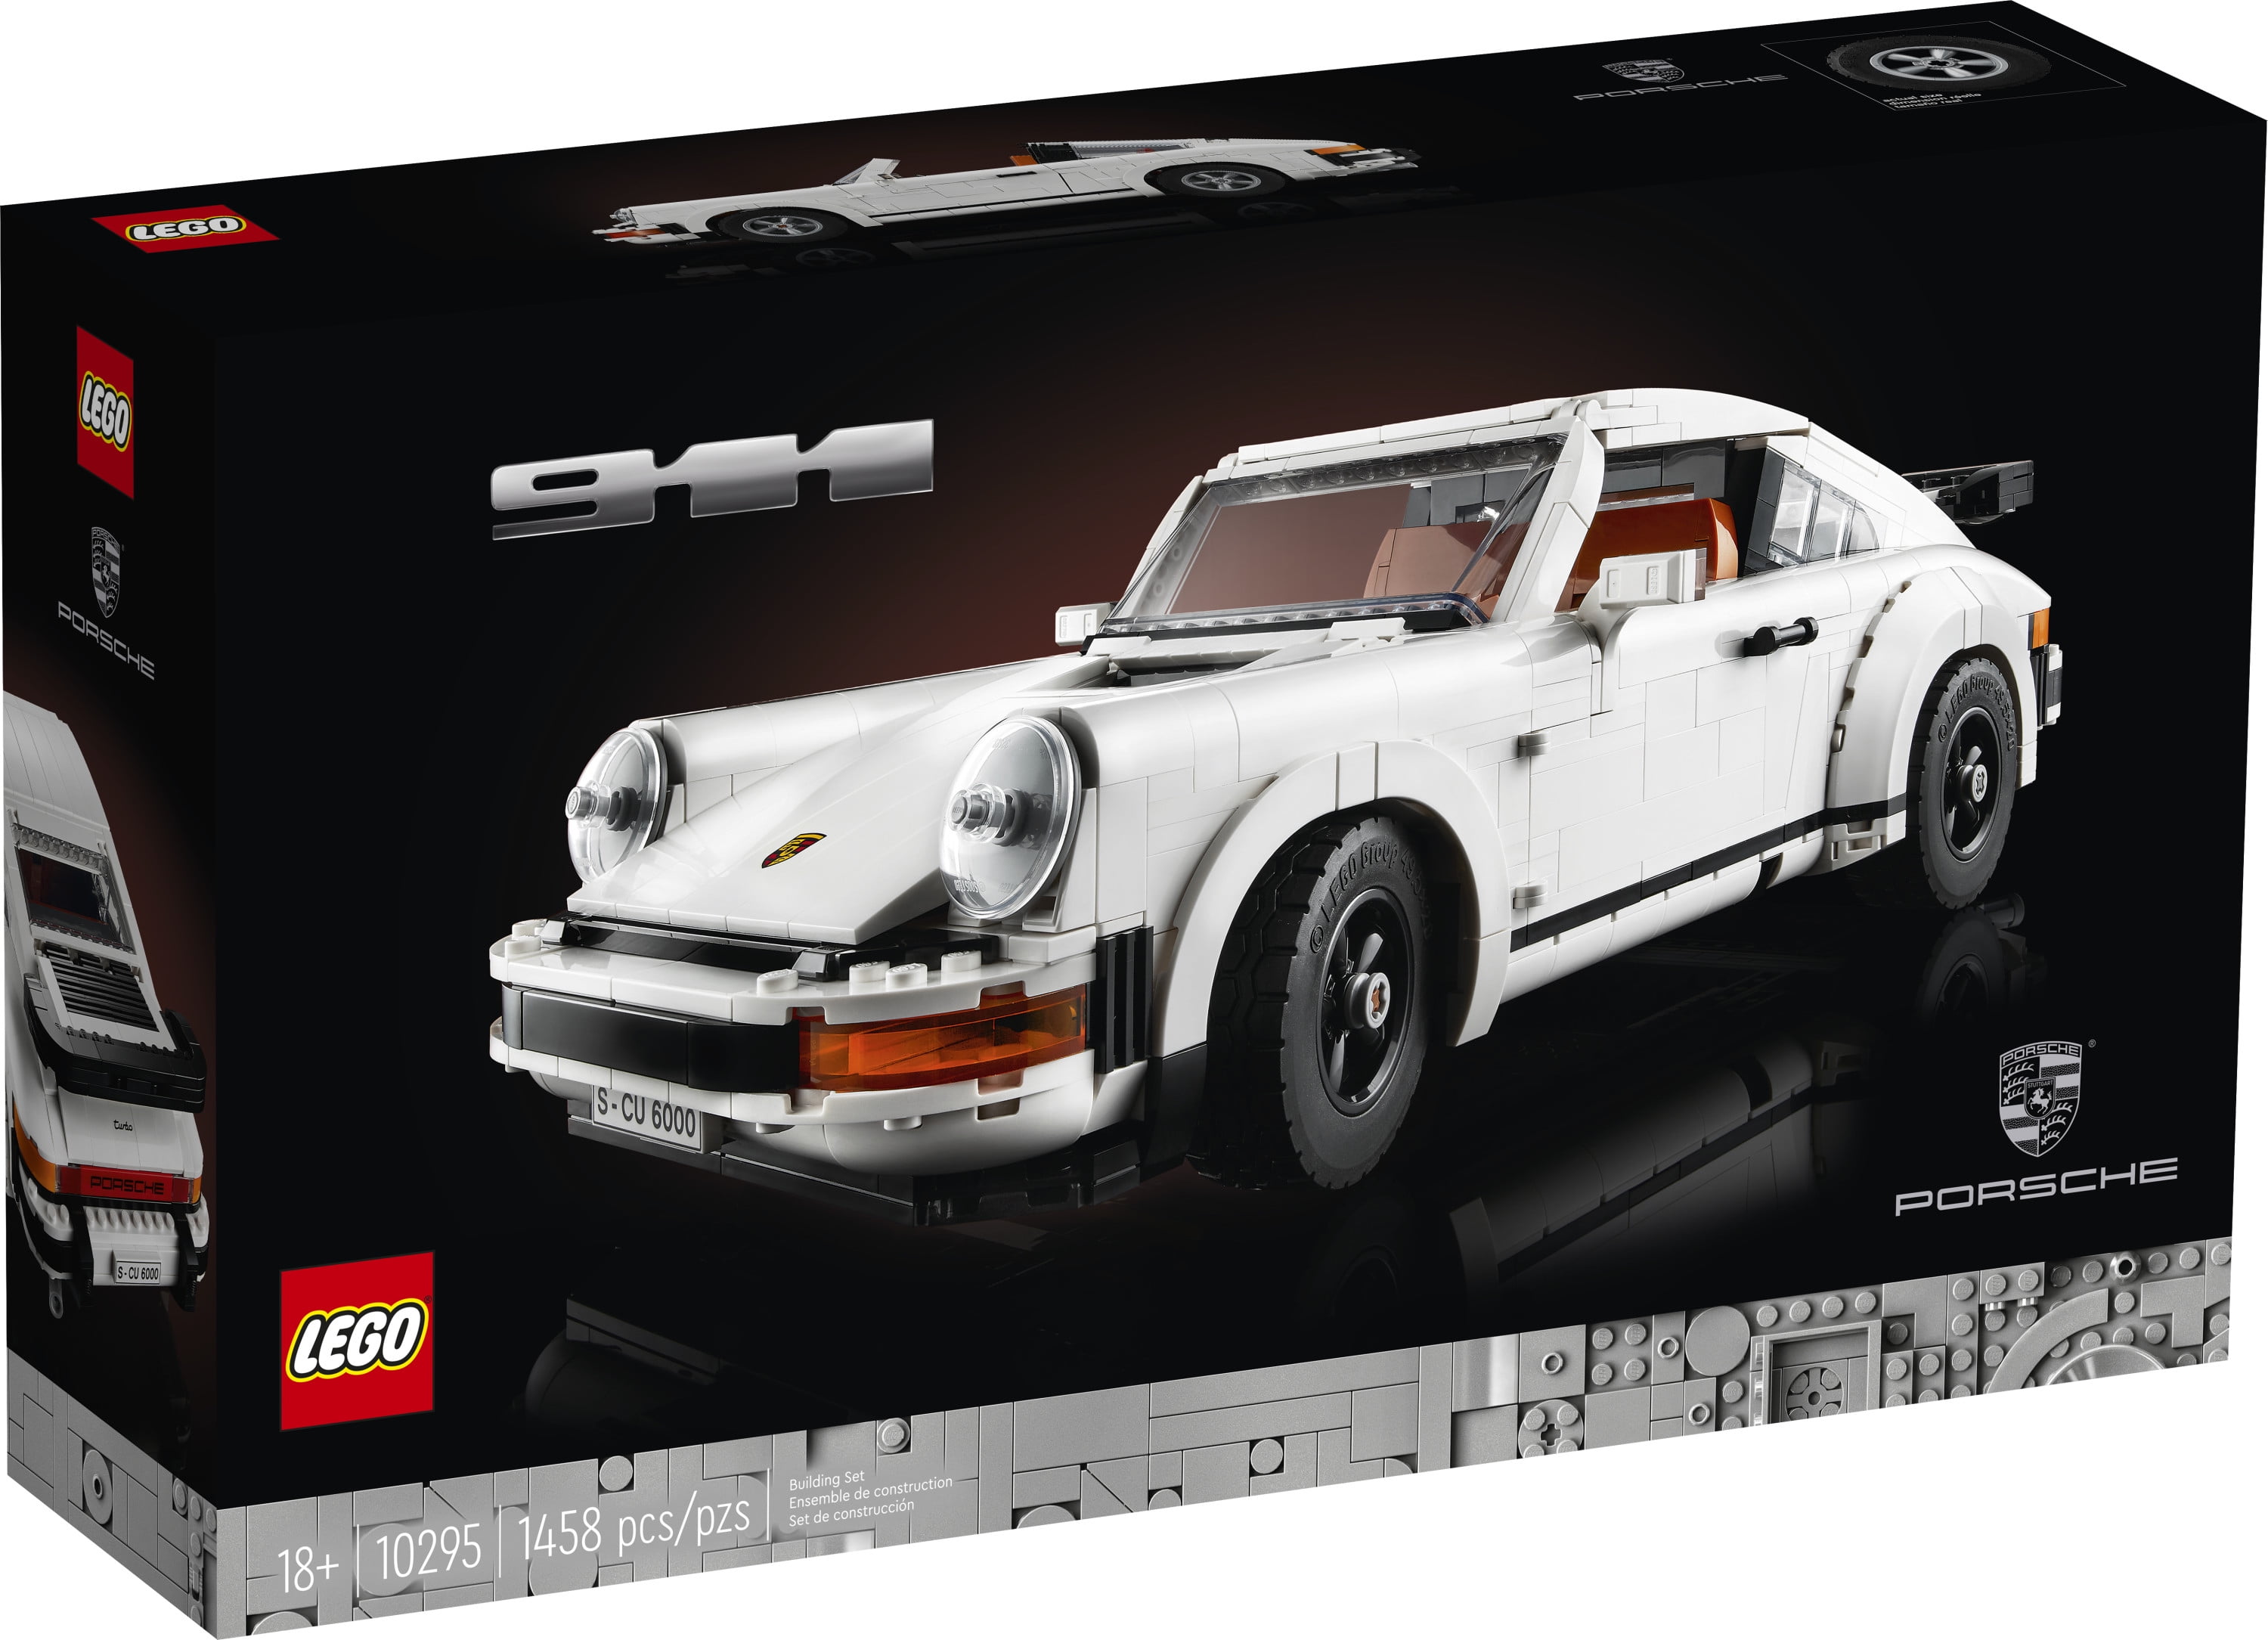 LEGO Icons Porsche 911 10295, Collectible Turbo Targa Model Car Building  Kit, 2in1 Porsche Race Car Set for Adults and Teens to Build, Gift Idea 